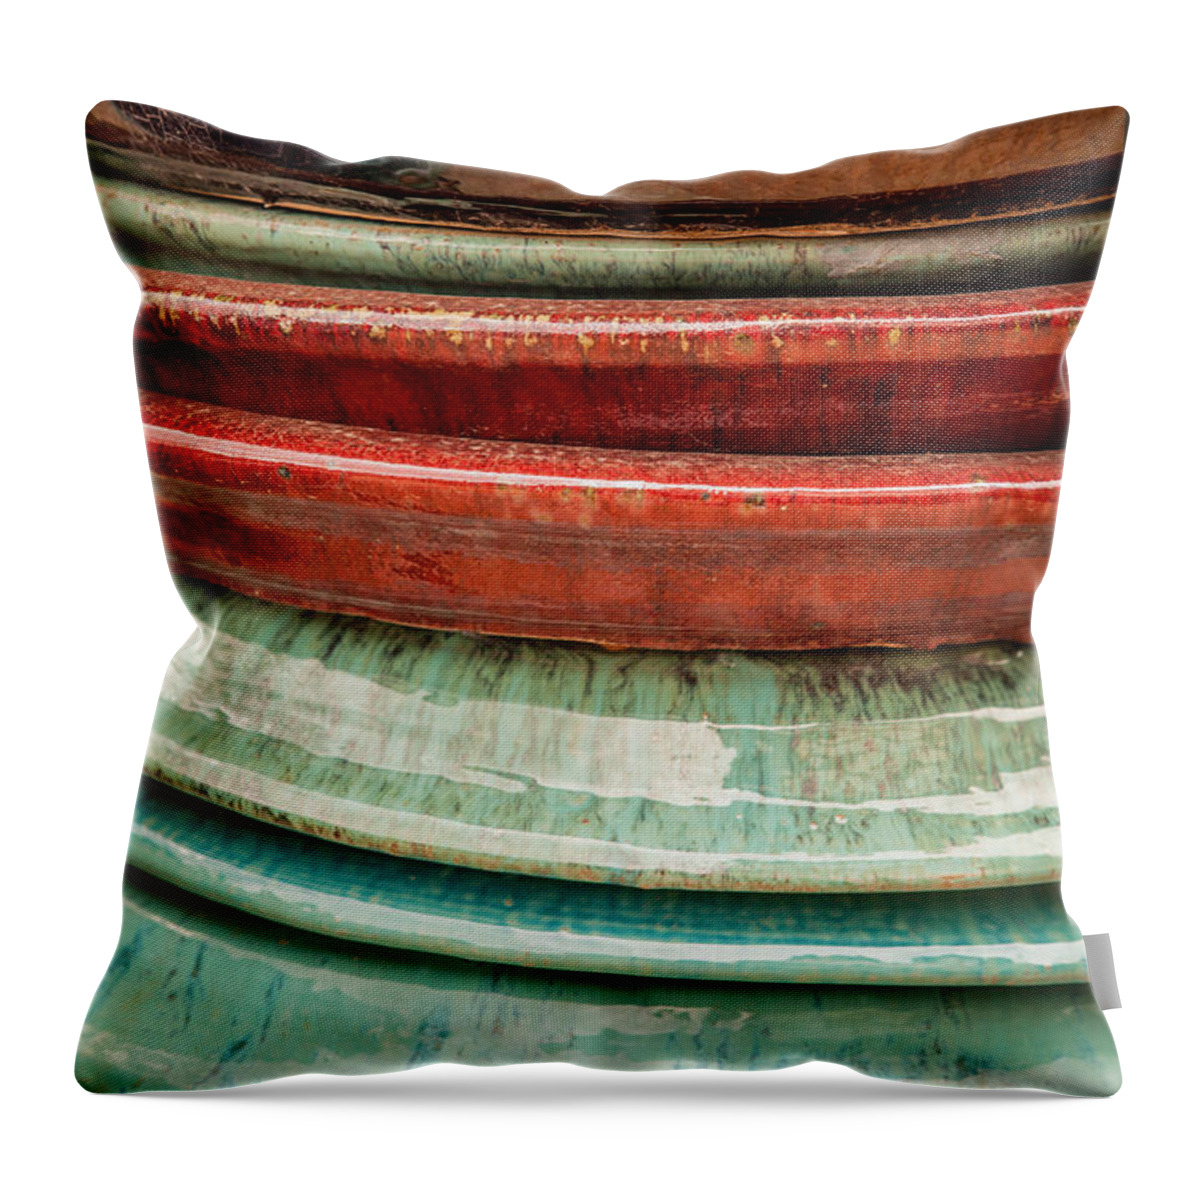 Fredericksburg Throw Pillow featuring the photograph Ceramic Lines by Melinda Ledsome